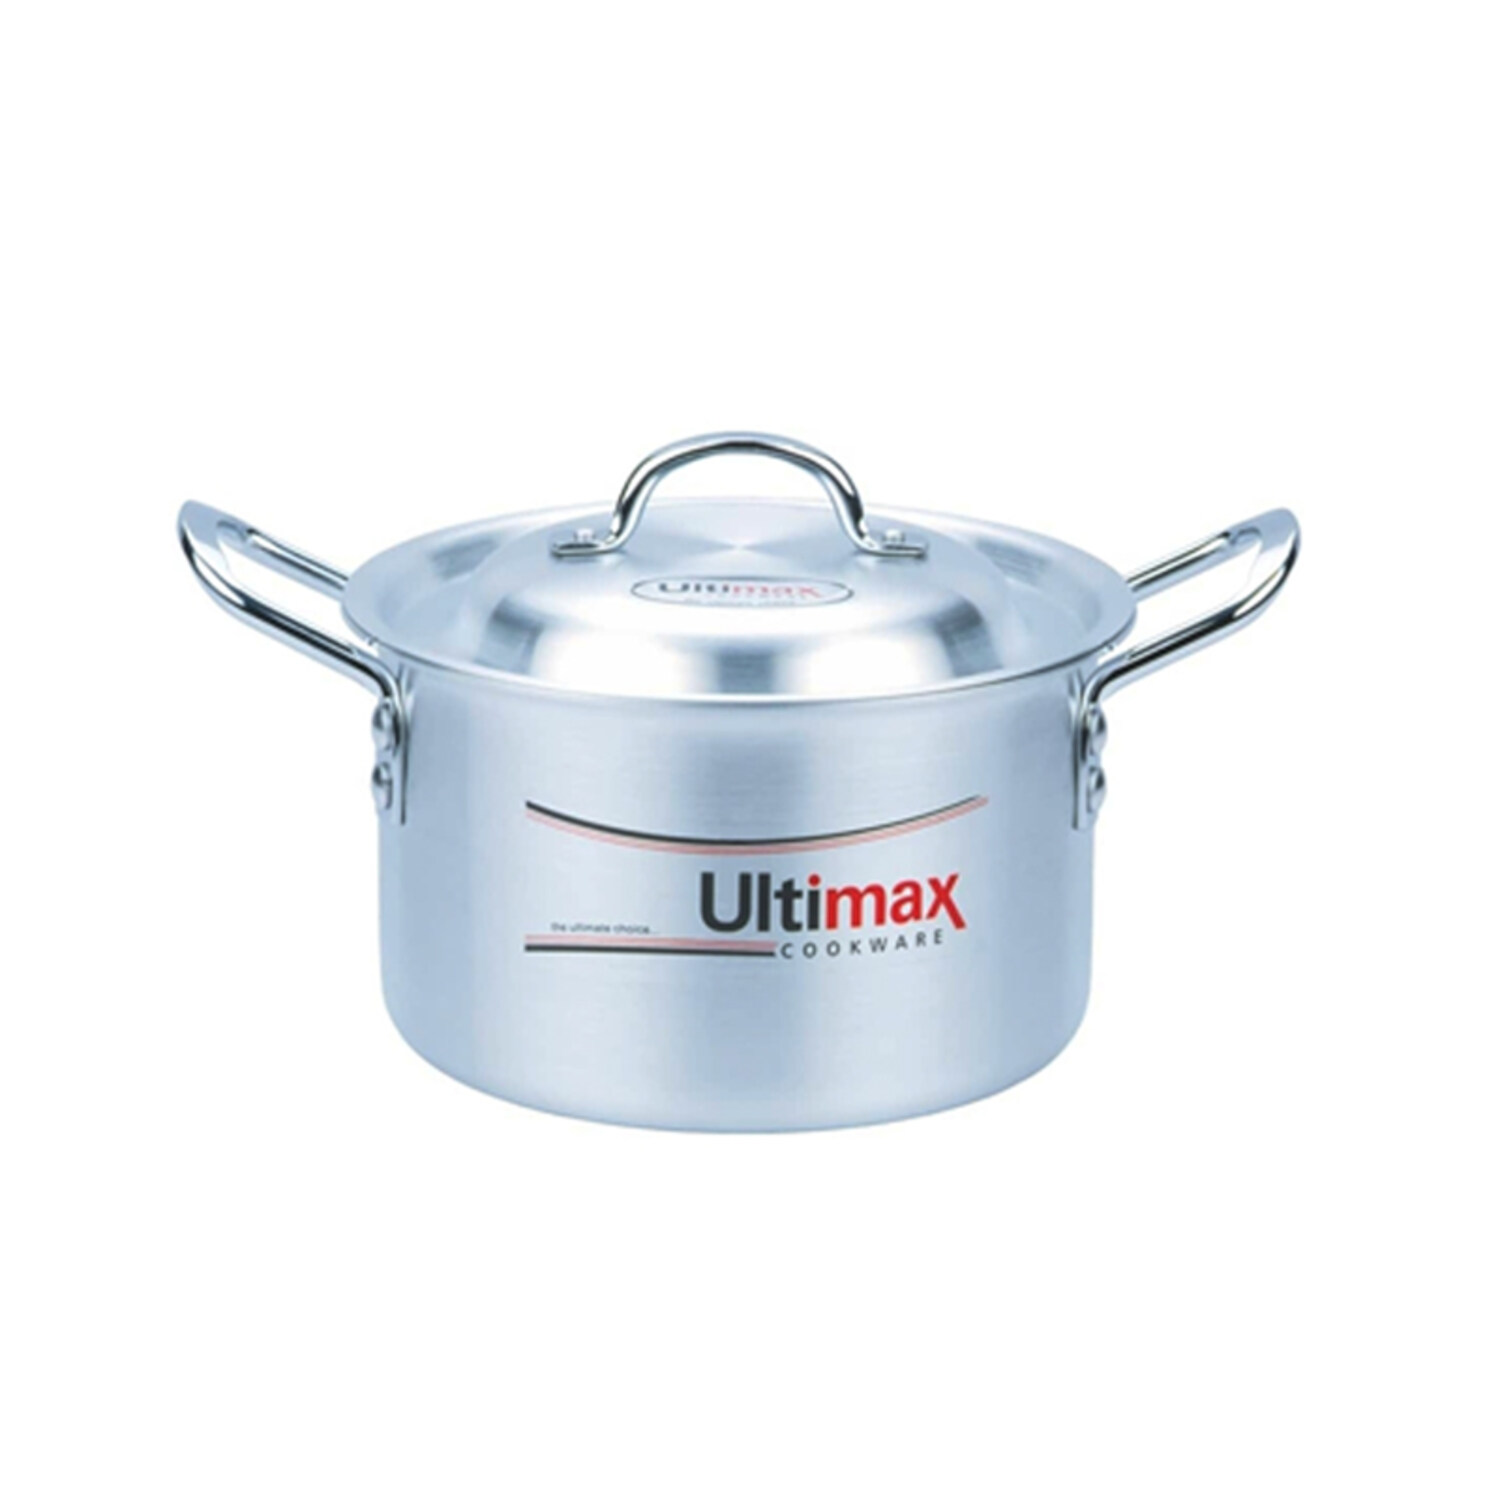 Ultimax Metal Finish Gloreous Cooking Pots 5 Pcs Set 6x10 With Durable Handles And Heavy Lids Original Made In Pakistan